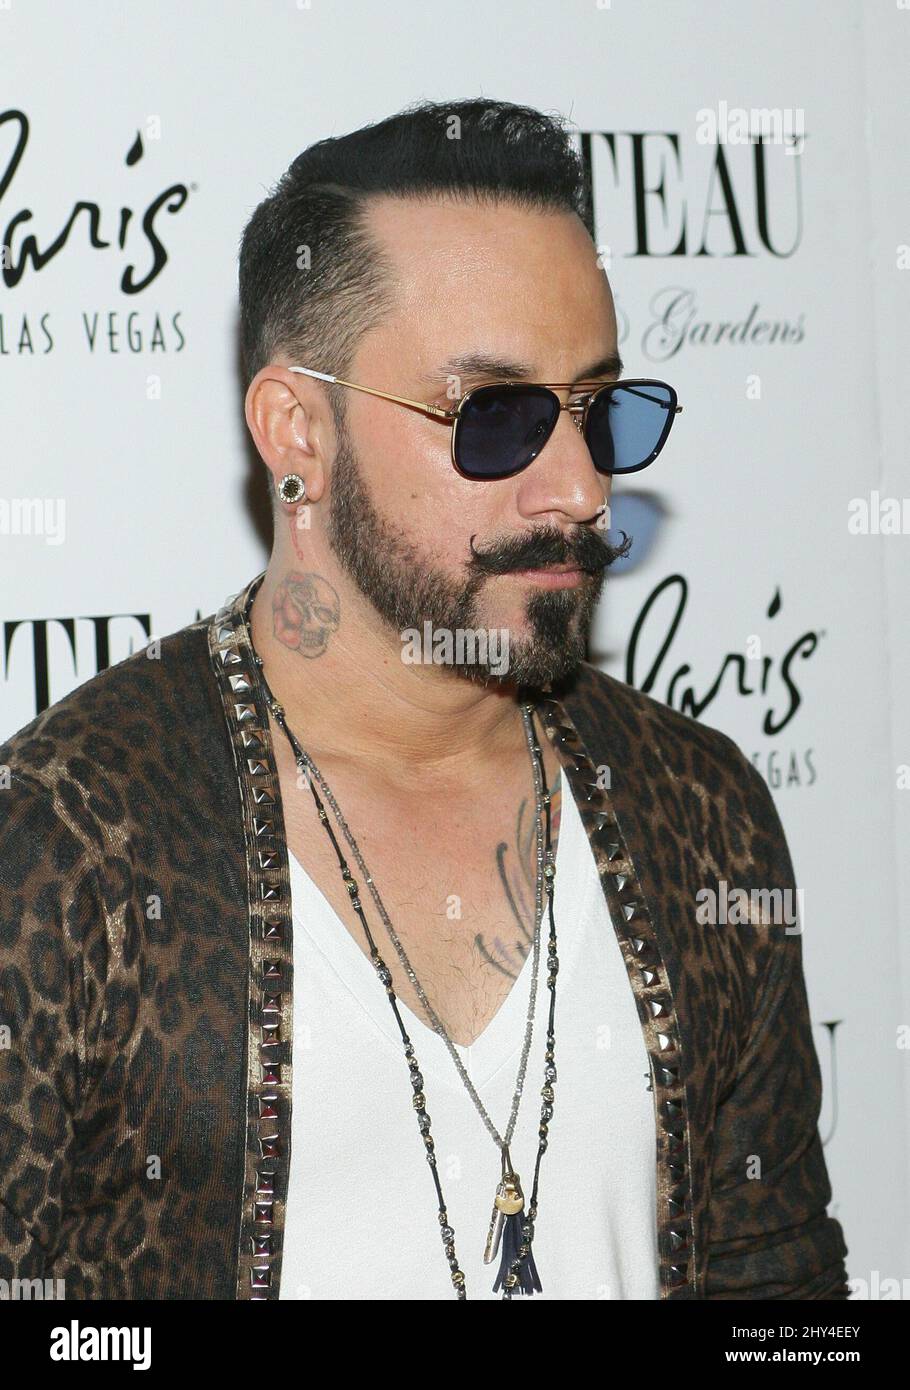 AJ McLean  Blood sweat tears Rinse and Repeat Thank  Facebook